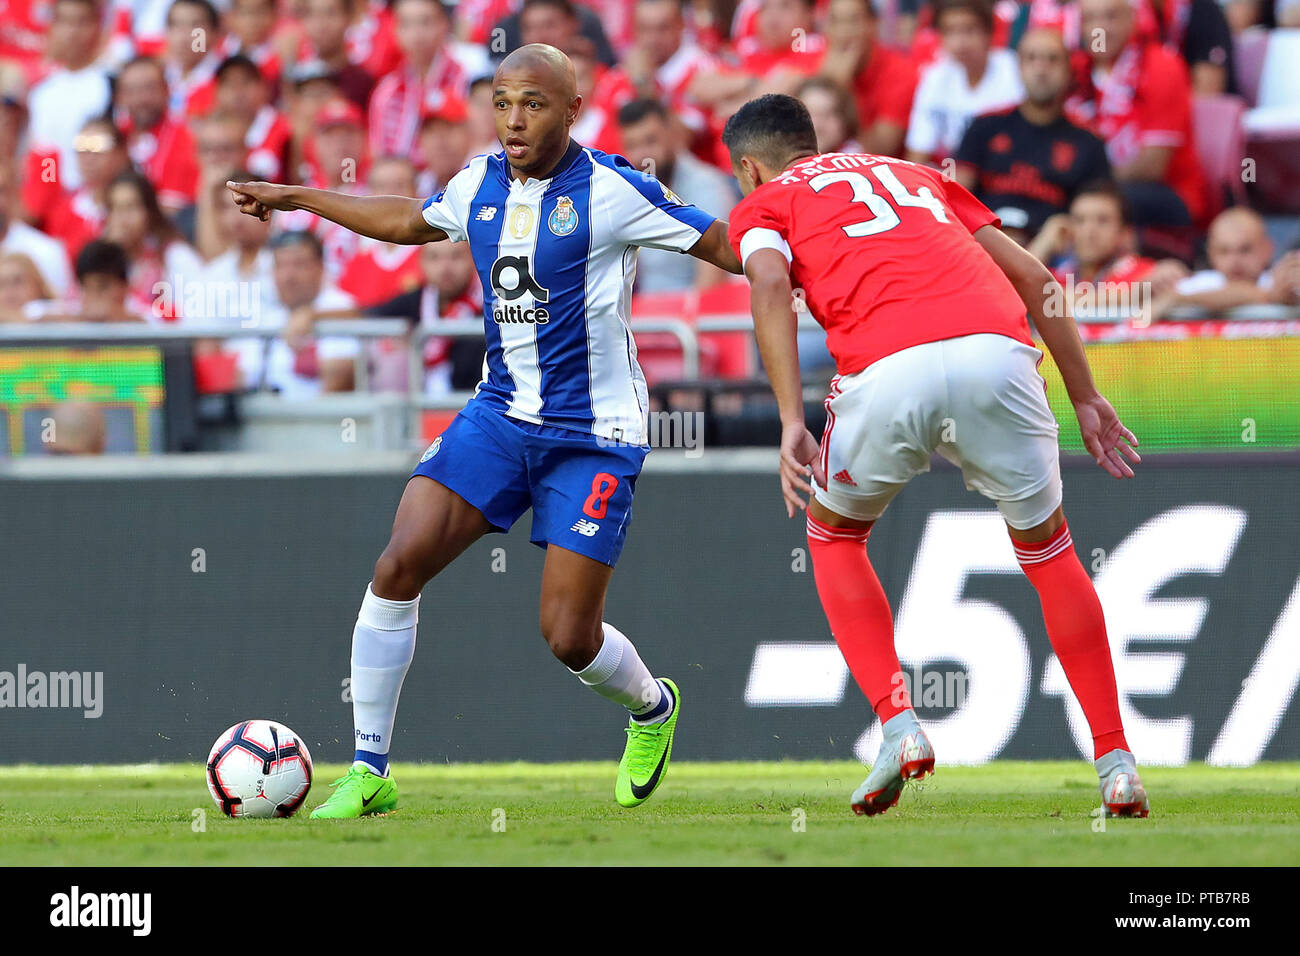 Yacine Brahimi of FC Porto seen in action during the League NOS 2018/19 football match between SL Benfica vs FC Porto. (Final score: SL Benfica 1-0 FC Porto) Stock Photo